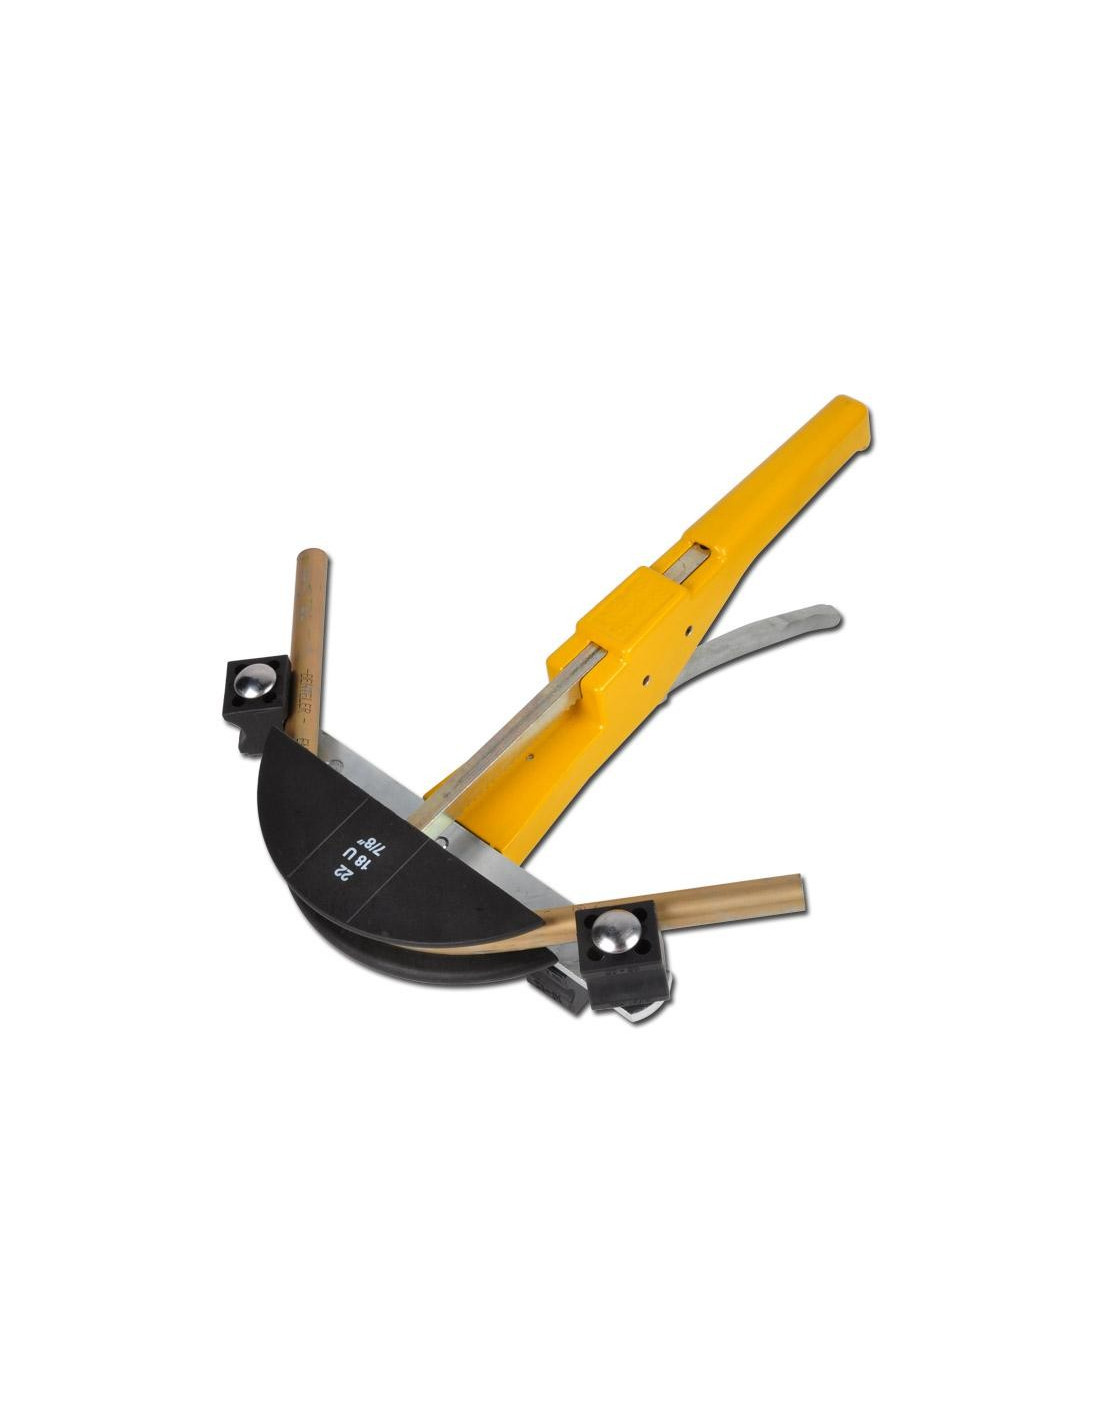 Cintreuse arbalète REMS Swing 153020 - Plomberie Online